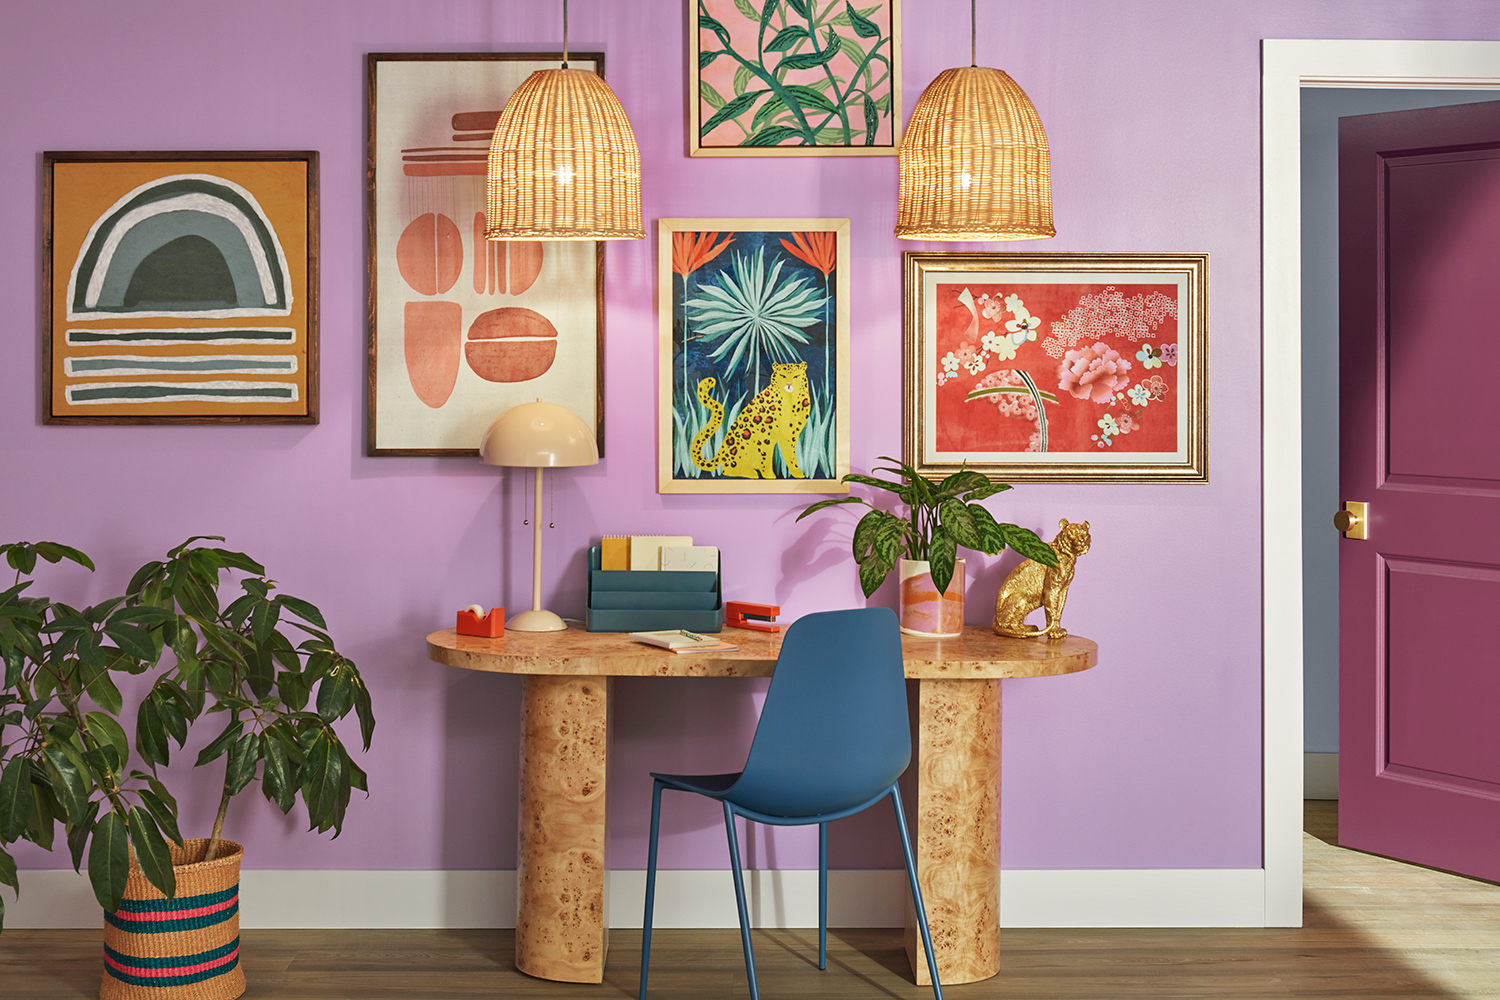 Eye-Catching Purple Bathroom Wall Décor Ideas: 7 Ways to Liven Up Your Space